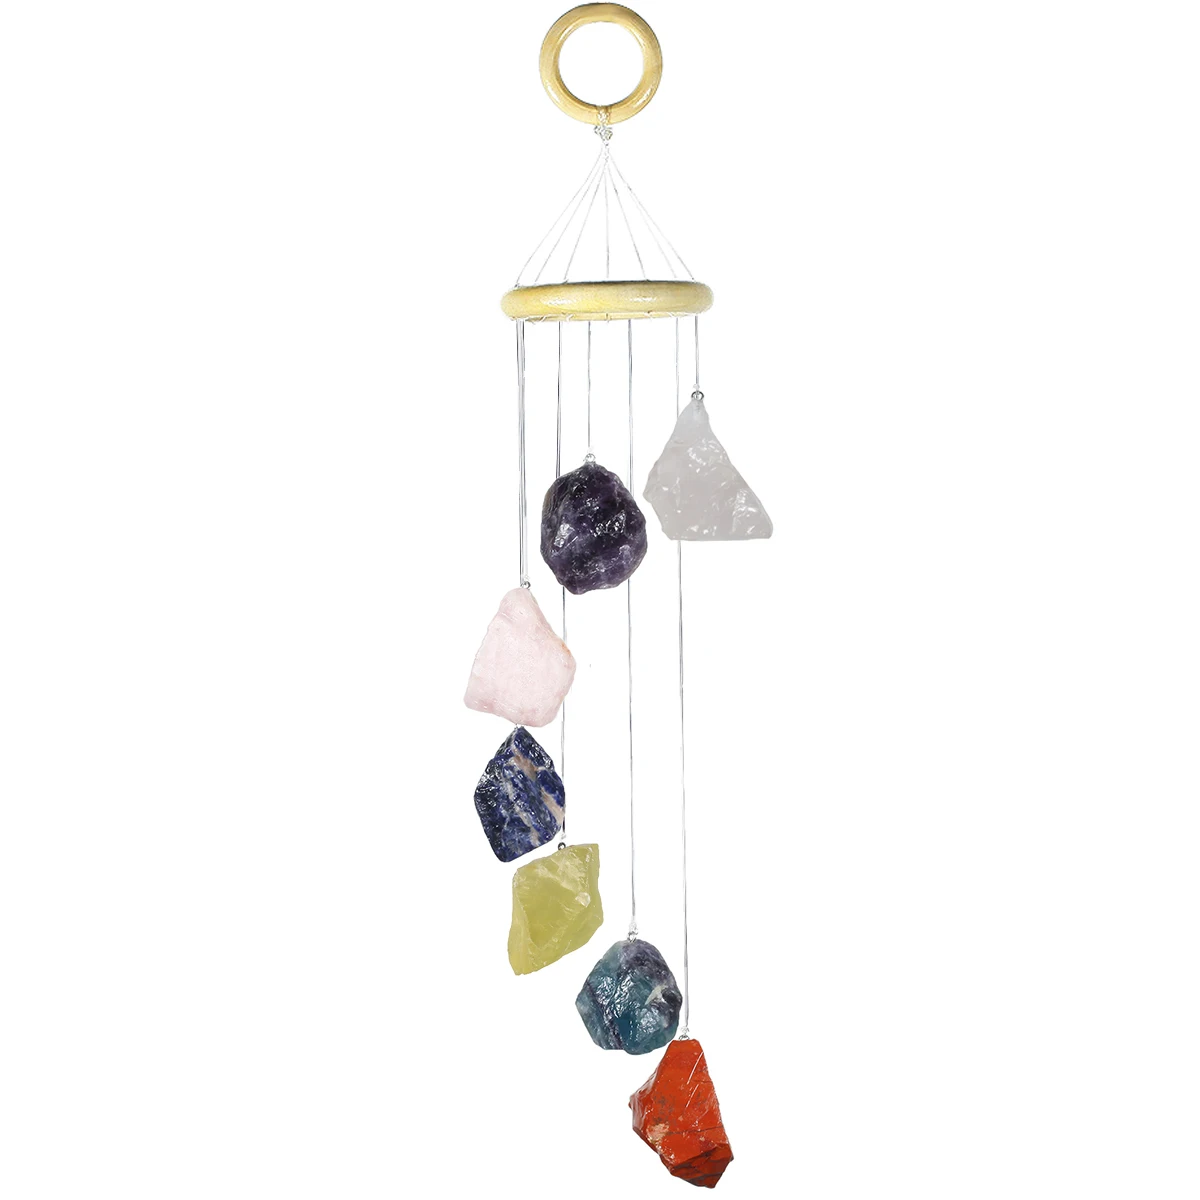 Natural Raw Gemstone Rough Crystal Stone Wind Chimes Reiki Healing Hanging Ornaments For Home Garden Decoration love heart shape crystal money tree with rough titanium coated quartz cluster base fengshui home decoration wedding ornaments